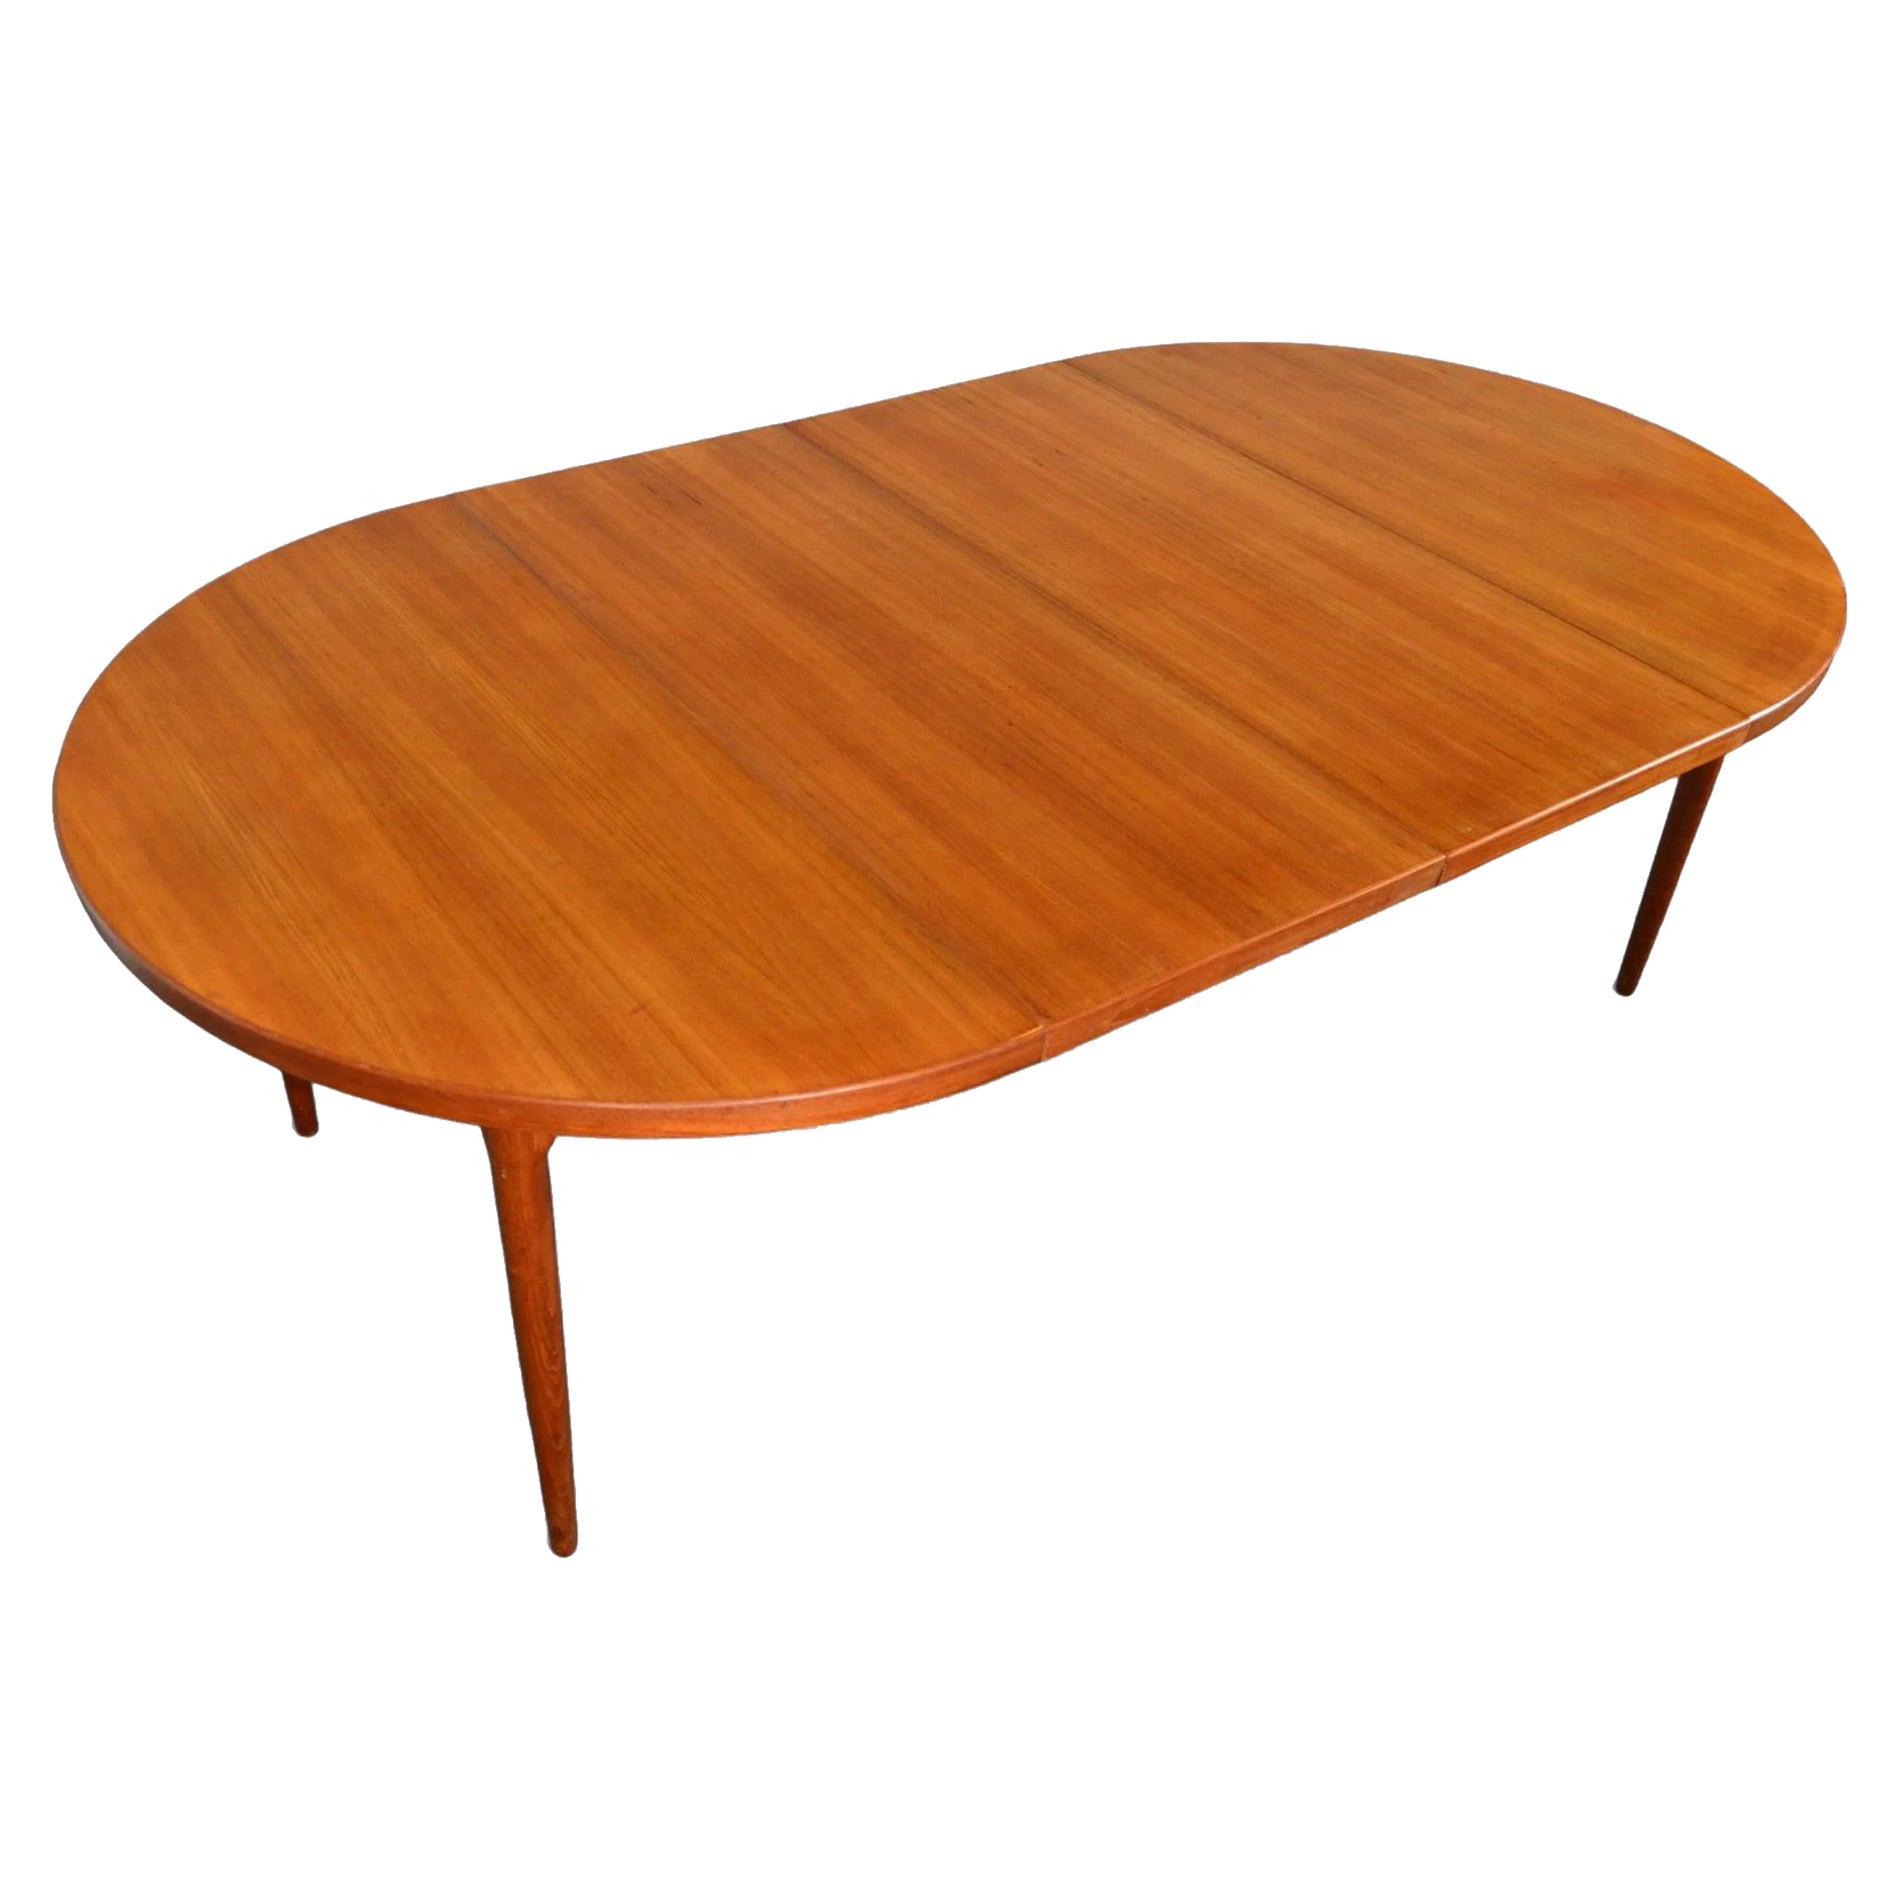 Round Danish 2 Leaf Teak Dining Table By Cj Rosengaarden + Coffee Table For Sale